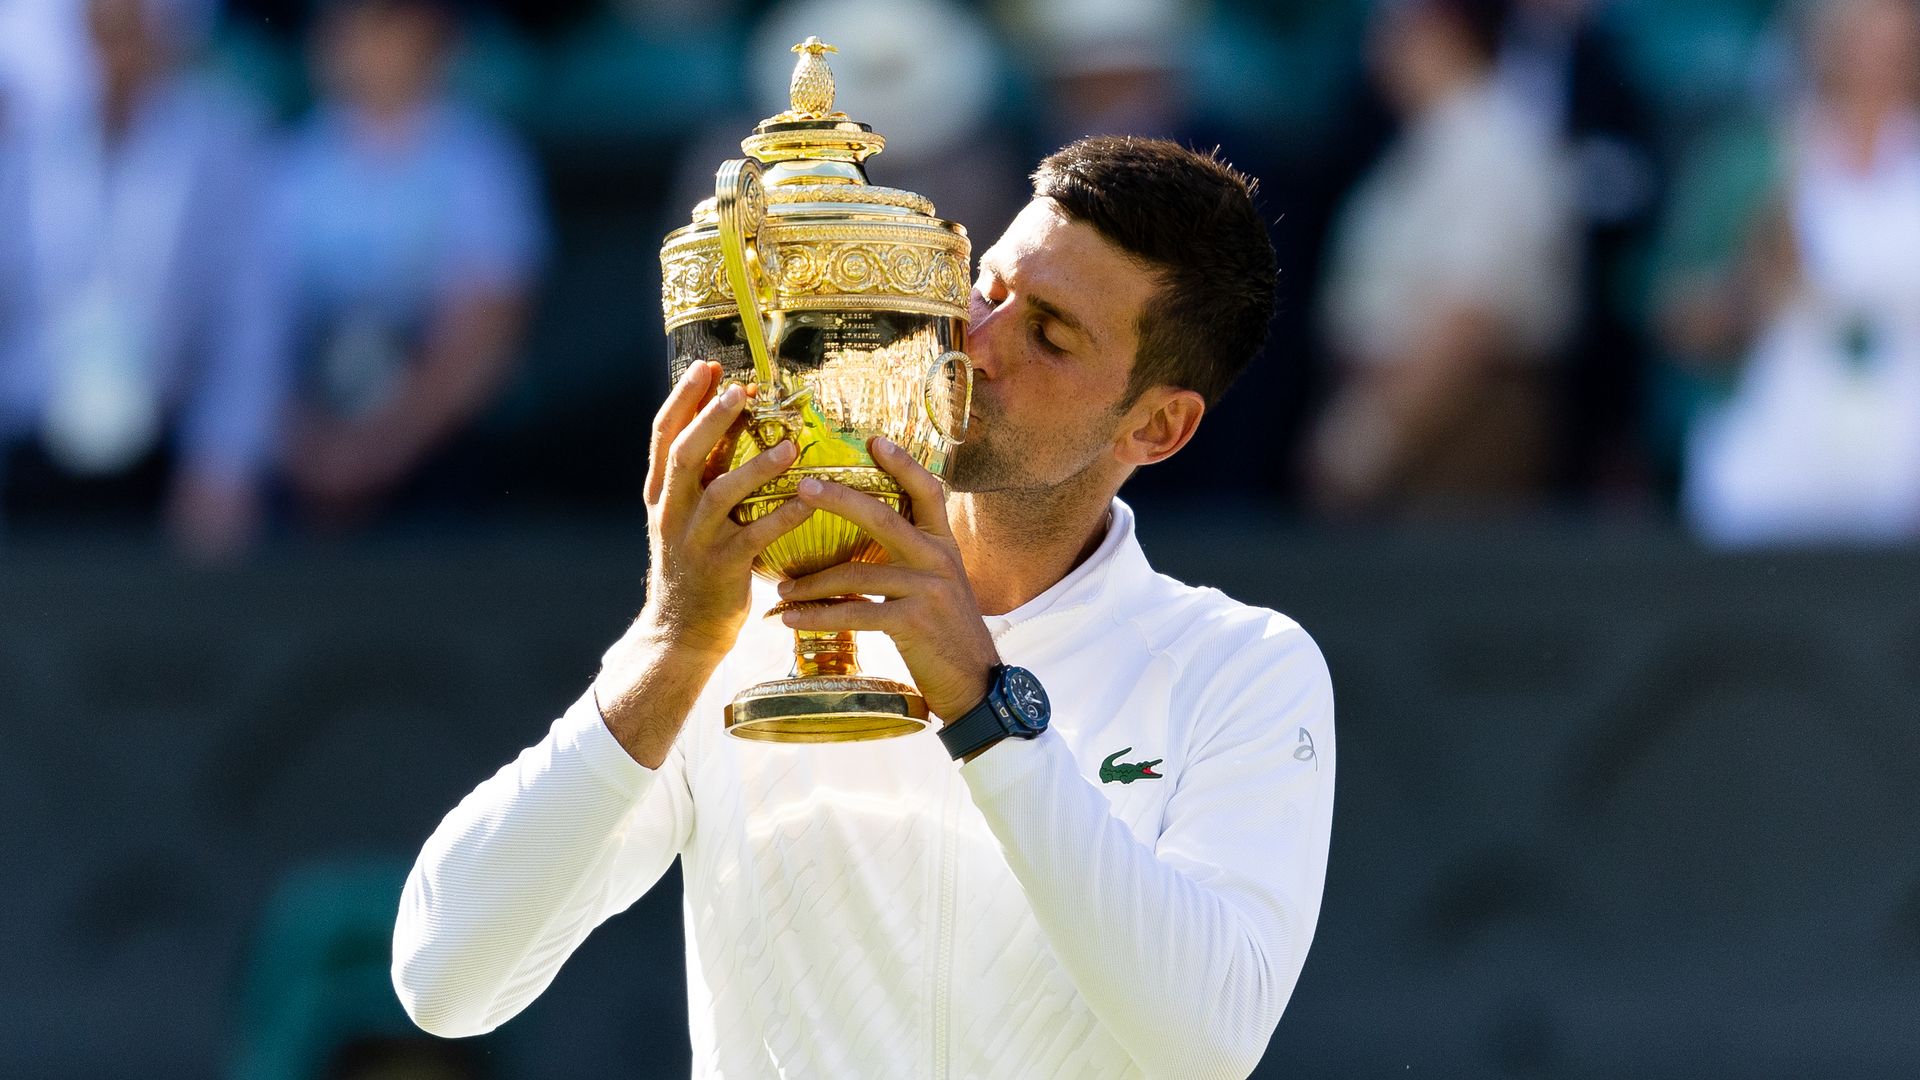 Novak Djokovic kisses the trophy after victory in the Wimbledon Men's Singles Final